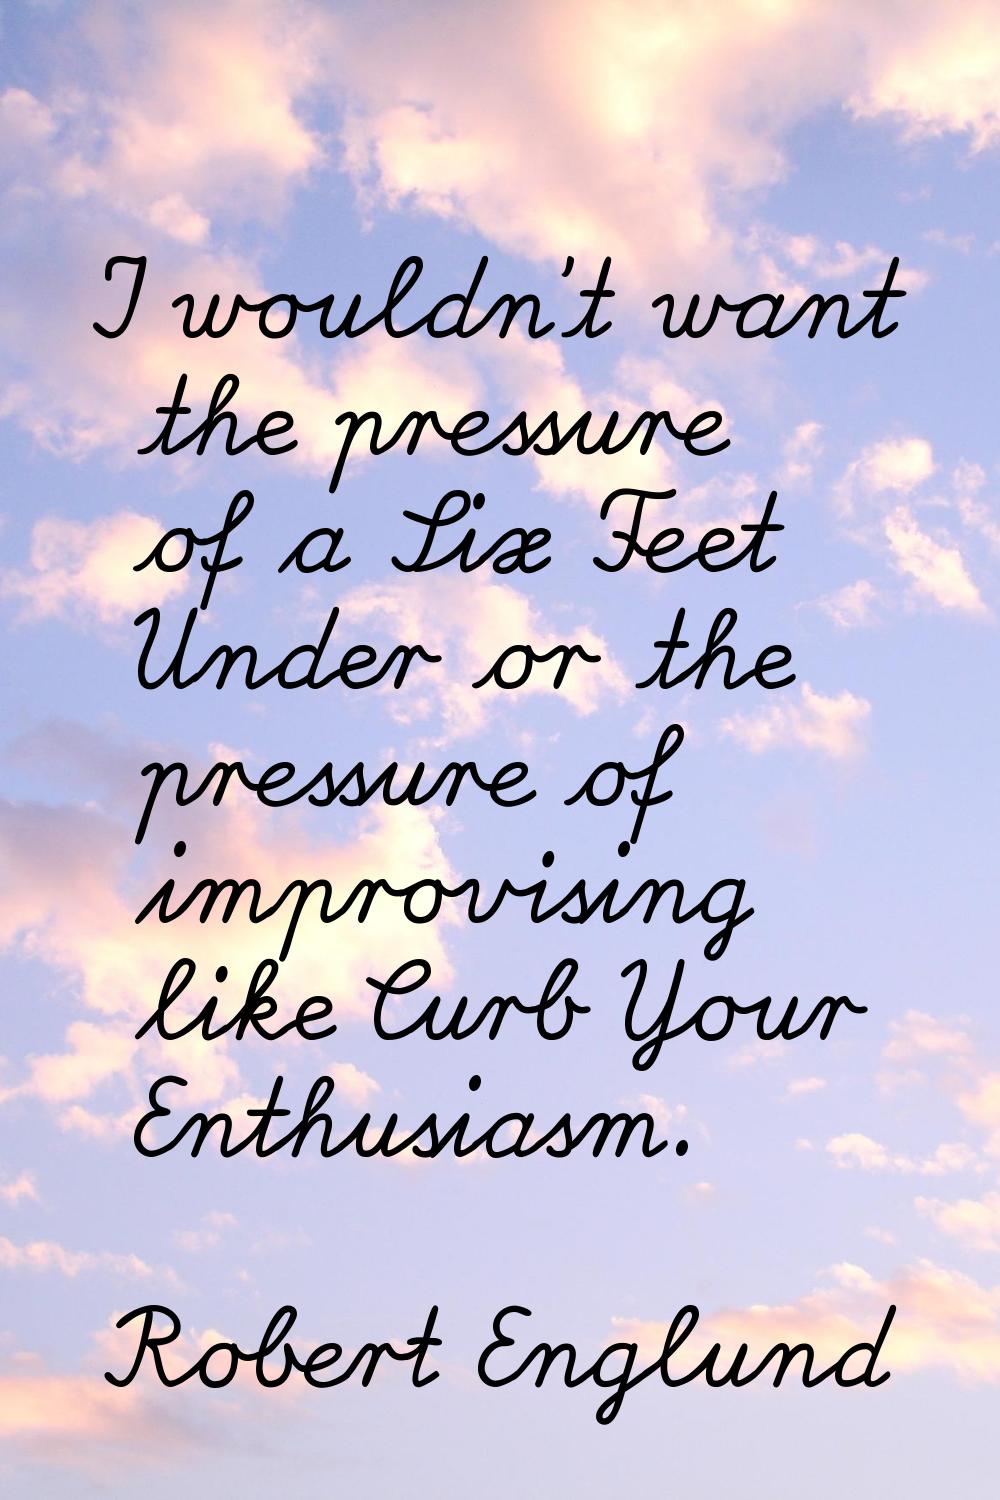 I wouldn't want the pressure of a Six Feet Under or the pressure of improvising like Curb Your Enth